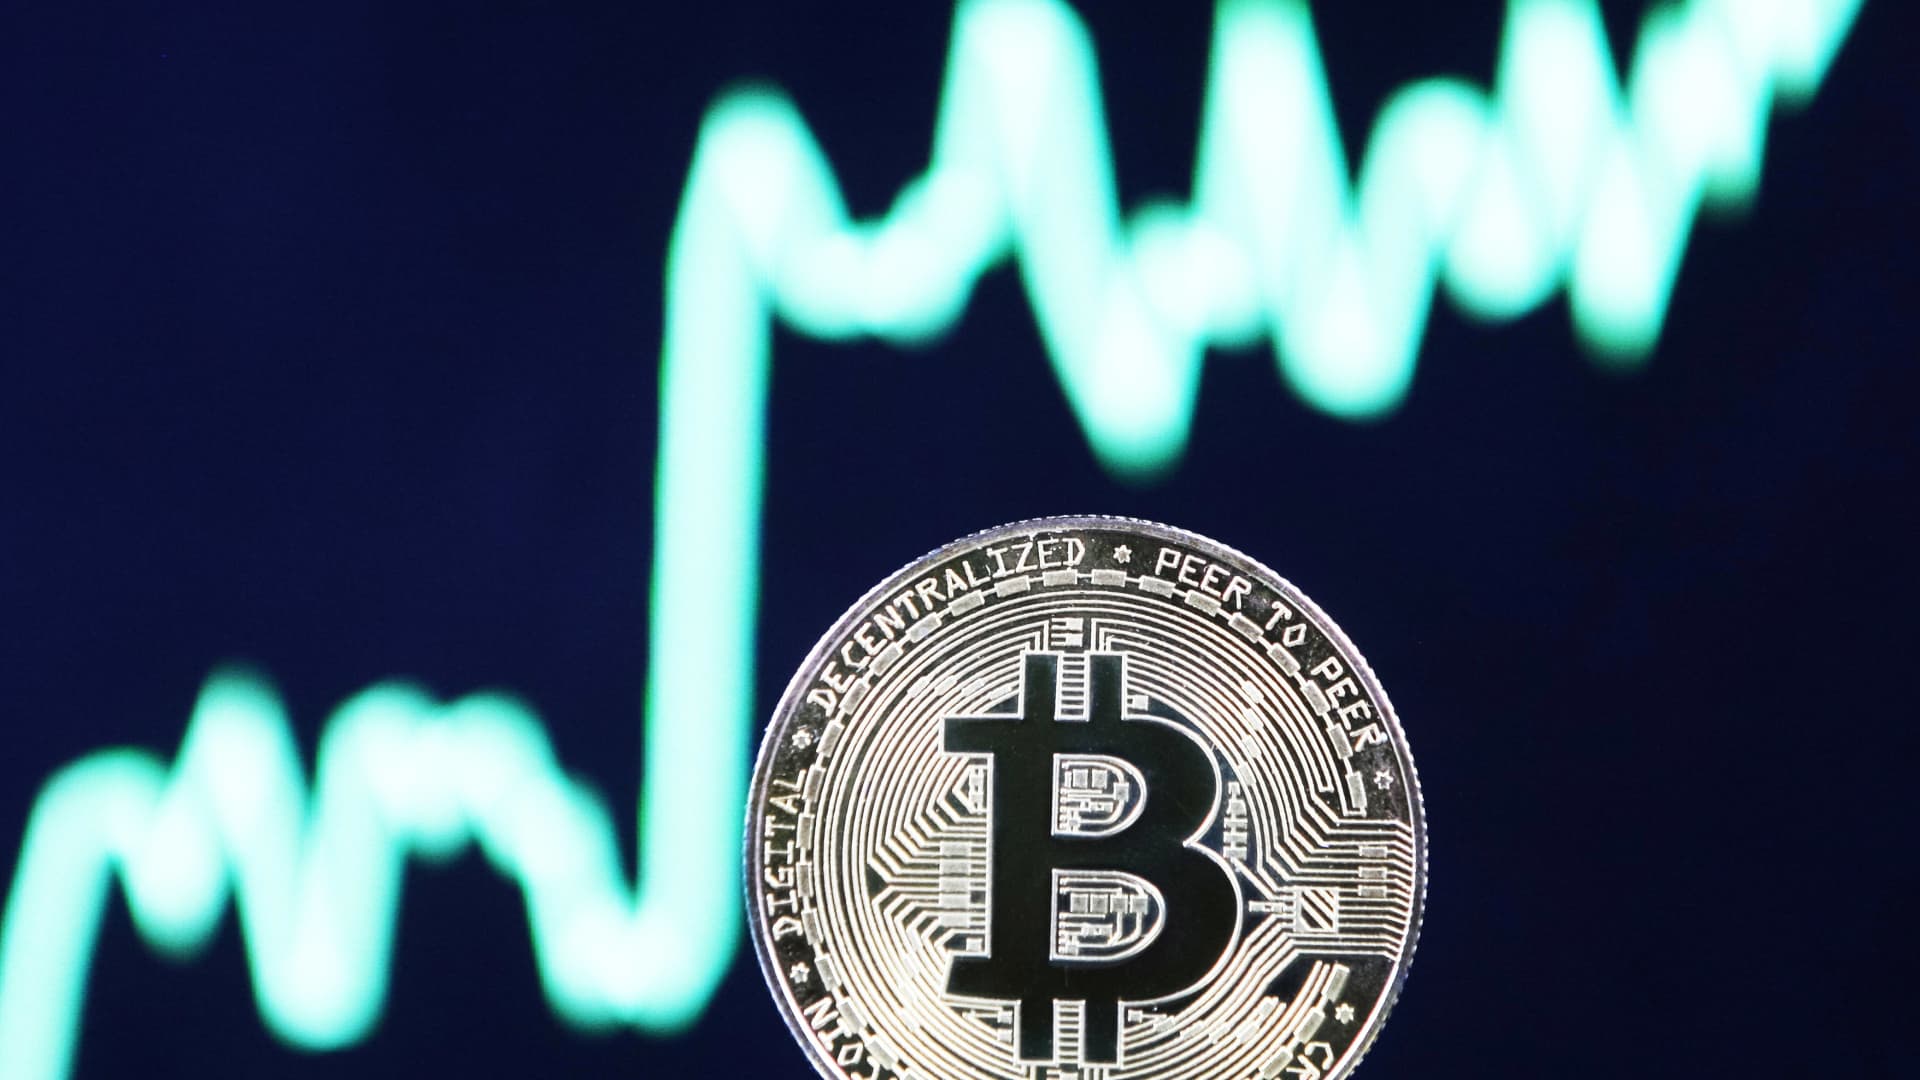 January was bitcoin's best month since 2021, but no crypto rally yet